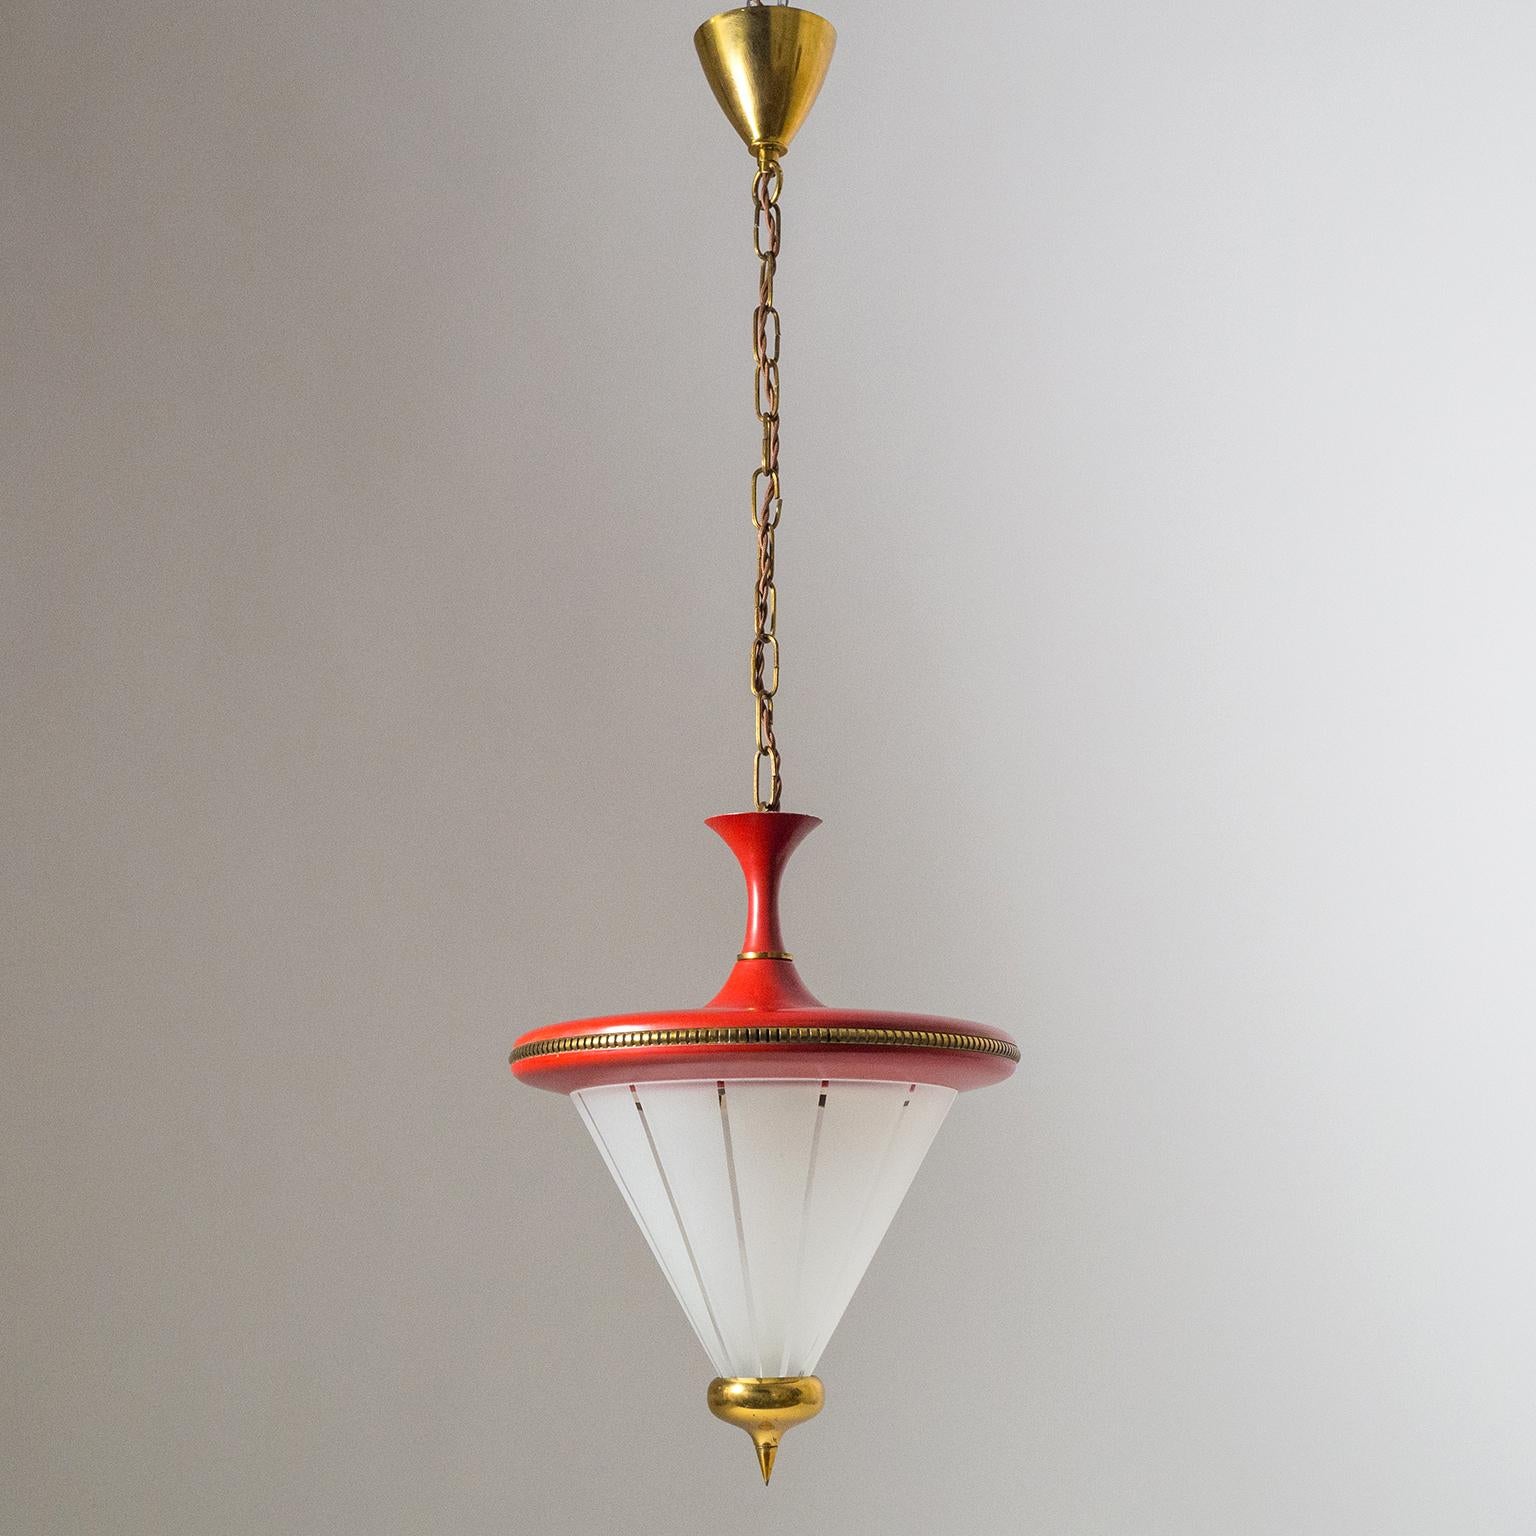 Lovely midcentury Italian lantern. A red lacquered body with intricate brass details and a conical satin striped glass diffuser. Very nice original condition with minor patina. Three original brass E14 sockets with new wiring. Height without the